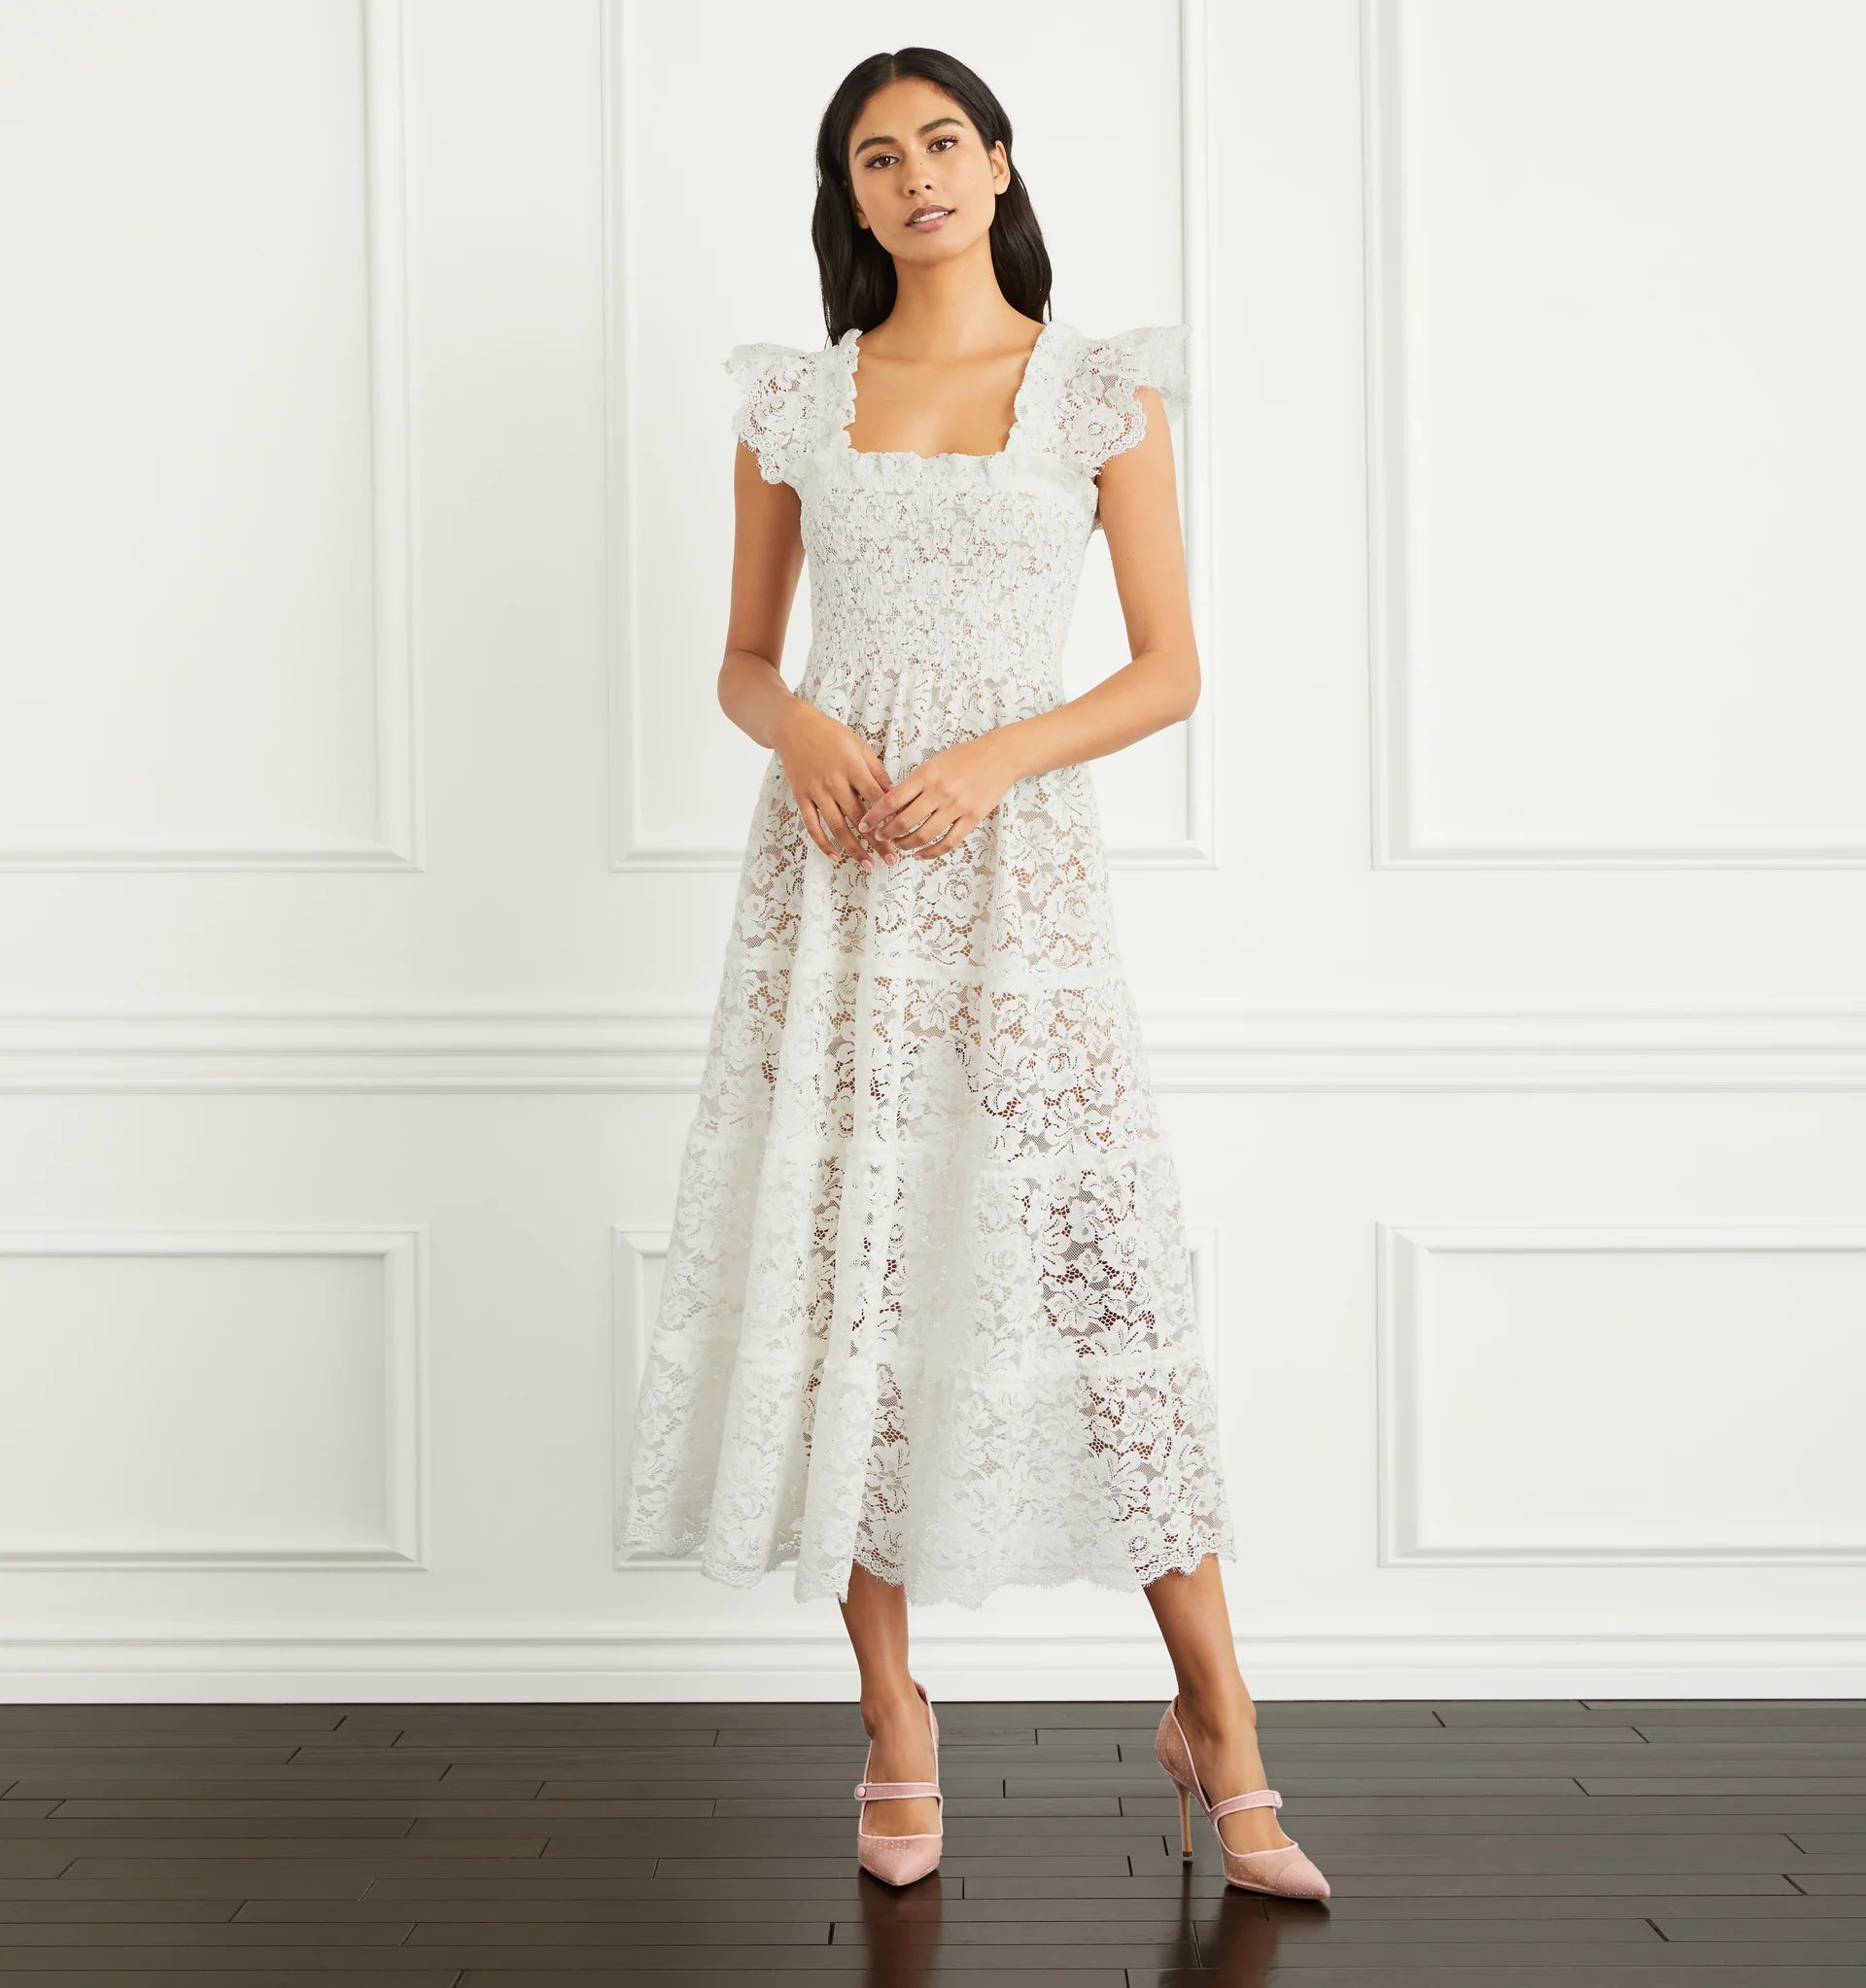 The Collector's Edition Ellie Nap Dress - White Lace | Hill House Home